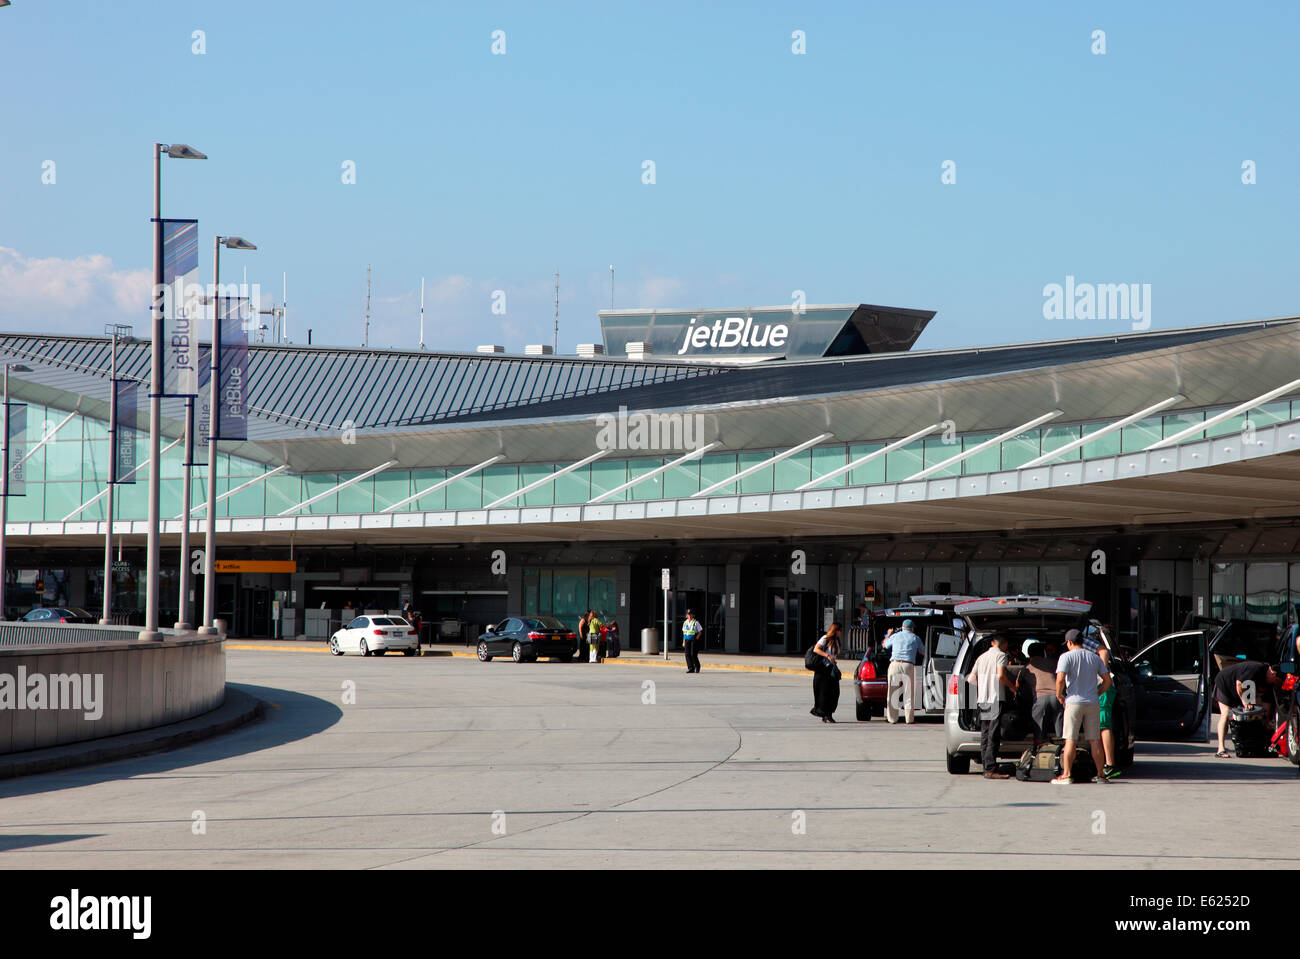 jet Blue Terminal 5 at JFK Airport in New York. Stock Photo